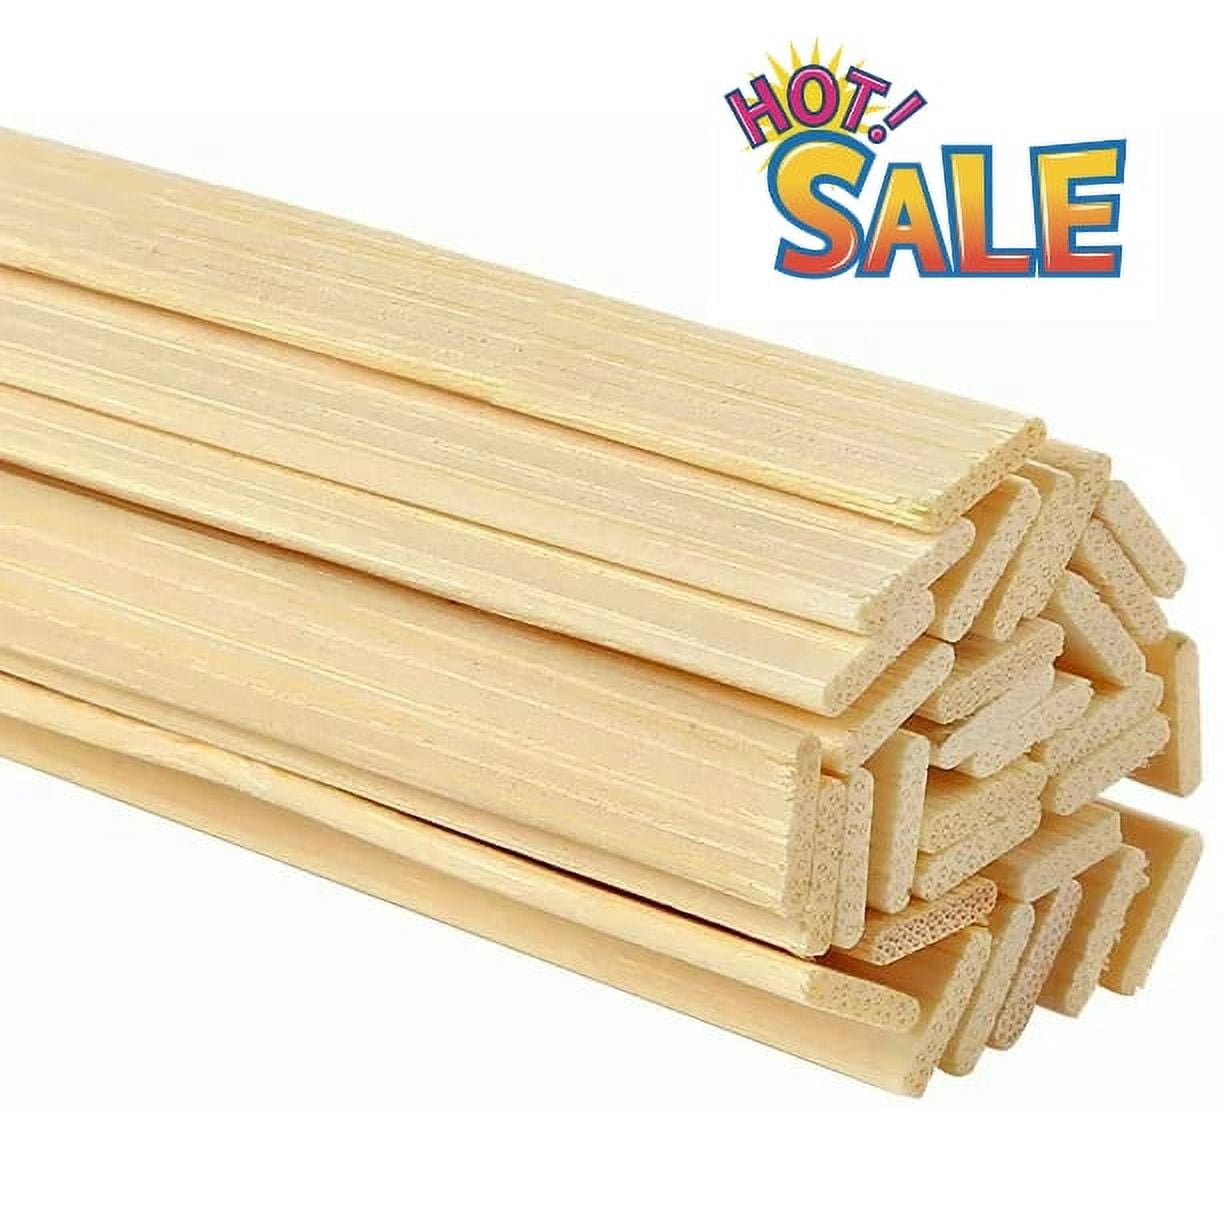 Generic 15.5 Extra Long Wooden Craft Sticks. Flexible, Can Be Made To  Curve, Strong. Natural Bamboo. 48 Pieces. 3/8 Wide - 15.5 Extra Long  Wooden Craft Sticks. Flexible, Can Be Made To